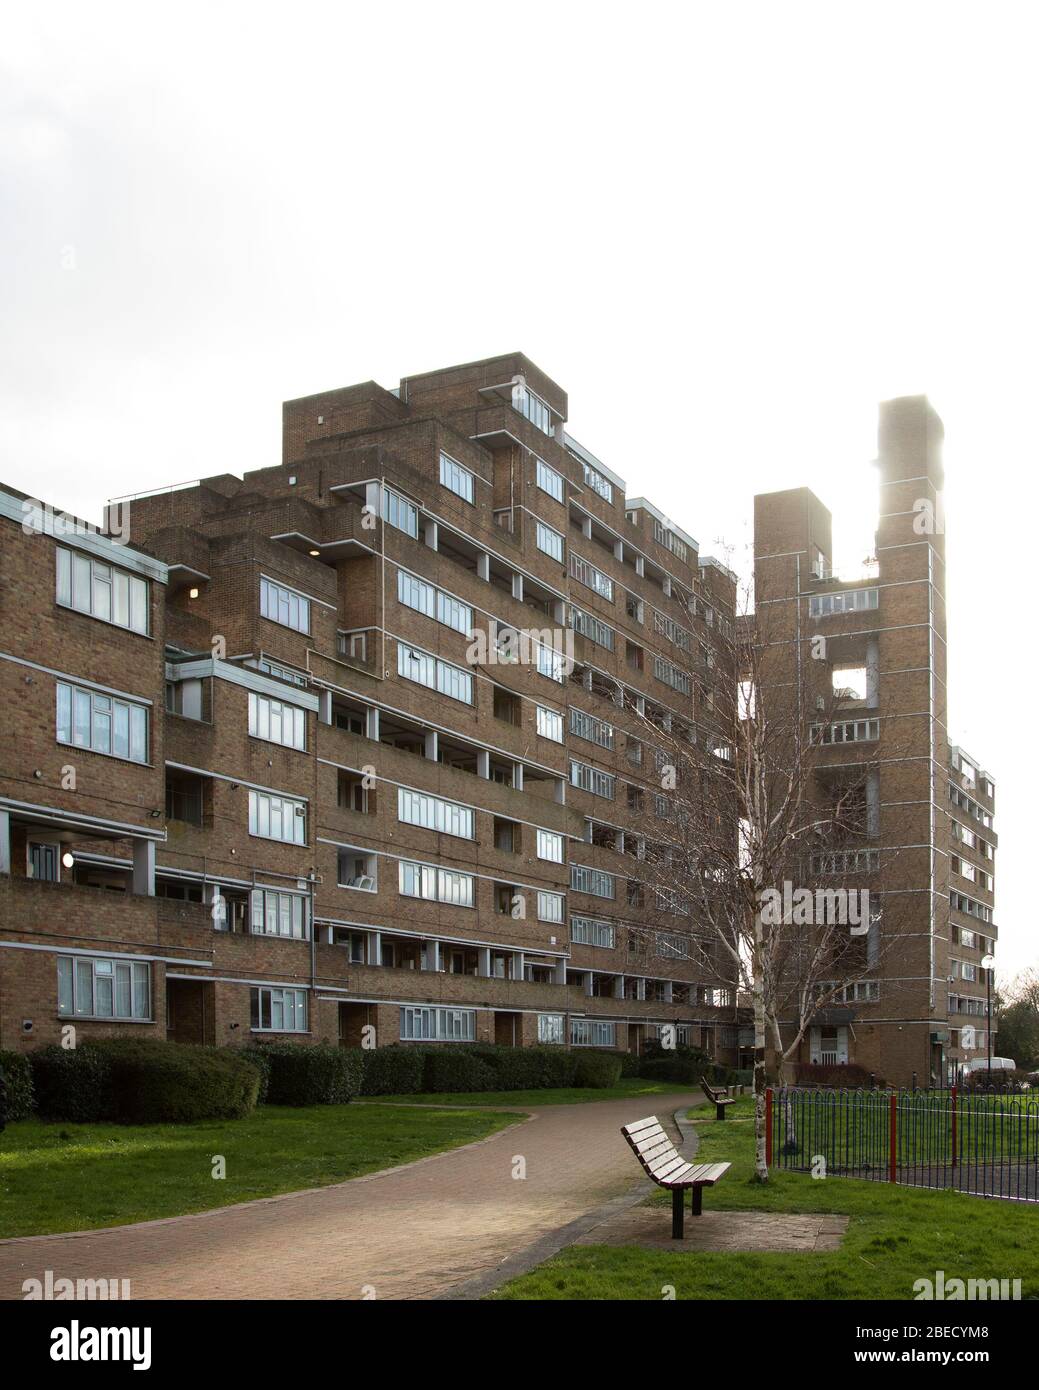 Dawson's Heights, a large social housing estate designed by Kate Macintosh and built in between 1964 and 1972 in South East London. Stock Photo